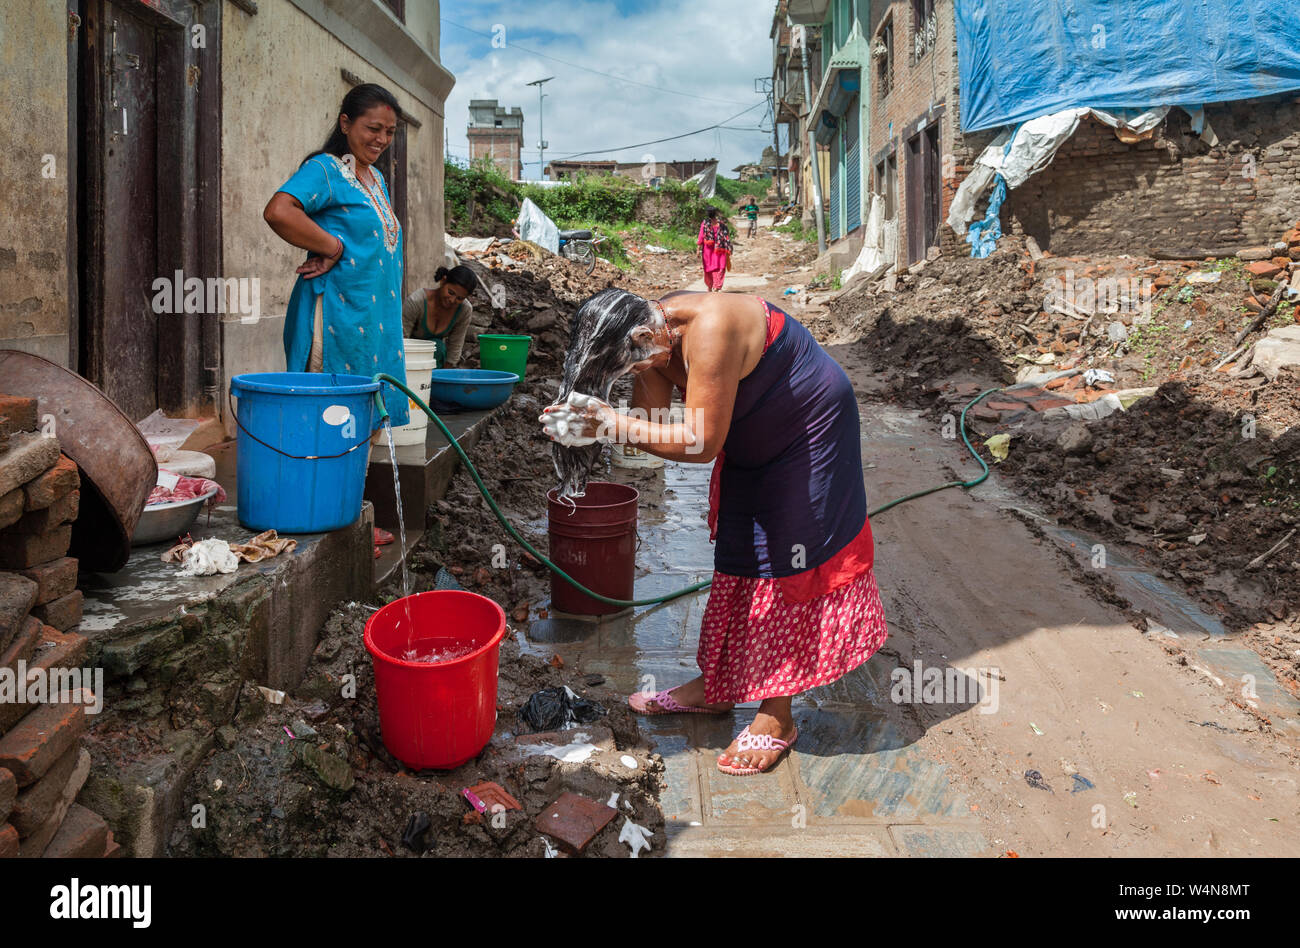 Women washing her hair on a street damaged by an earthquake in Nepal Stock Photo